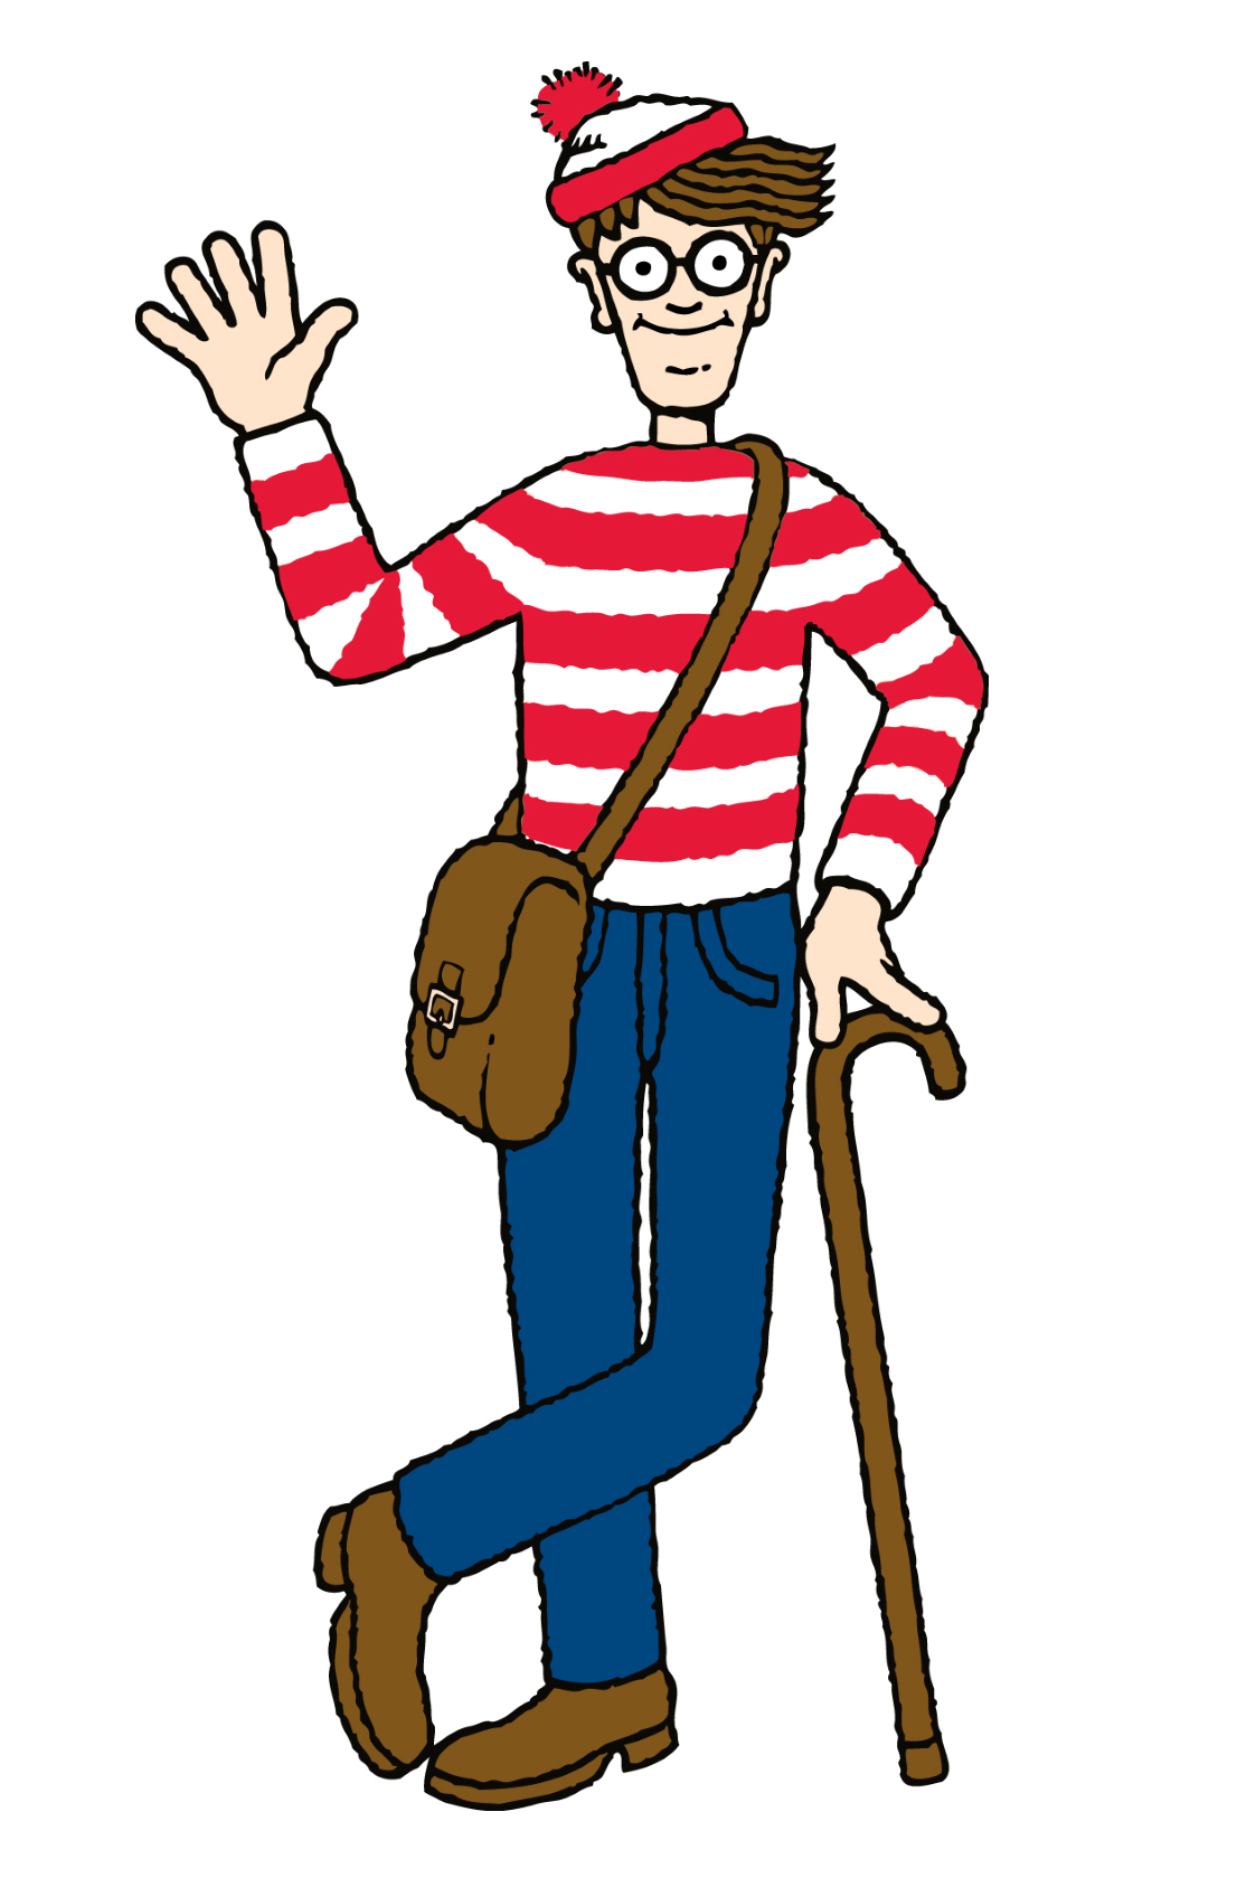 Waldo character with a cane and satchel, waving